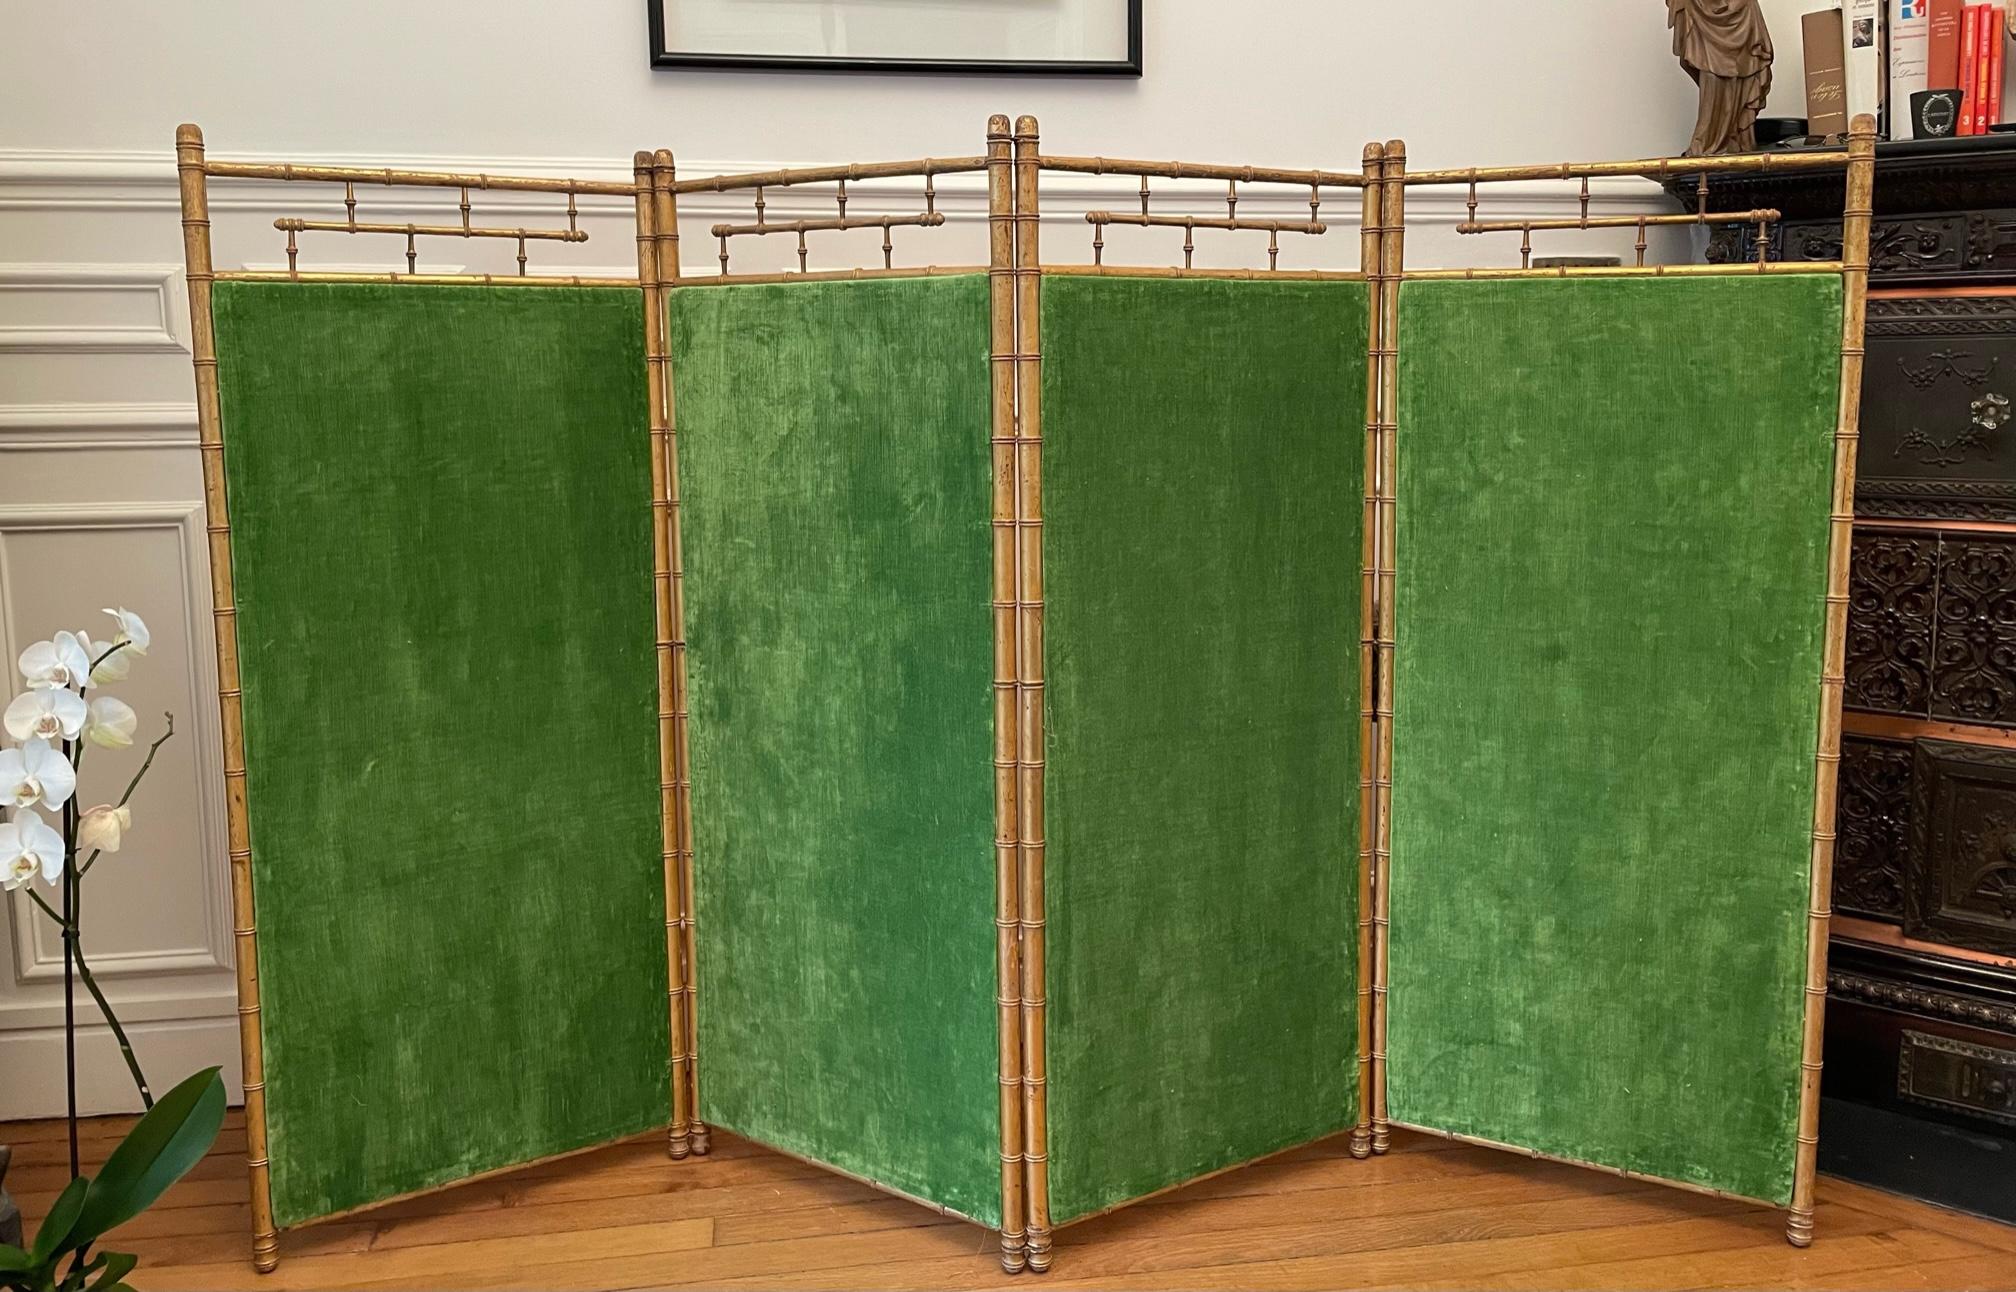 Rare Napoleon III gilded wood four-leaf screen upholstered with on the one side a Striped vintage Madeleine Castaing fabric and and on the other side a Green linen velvet remembering the decoration of the hotel particulier of Hubert de Givenchy